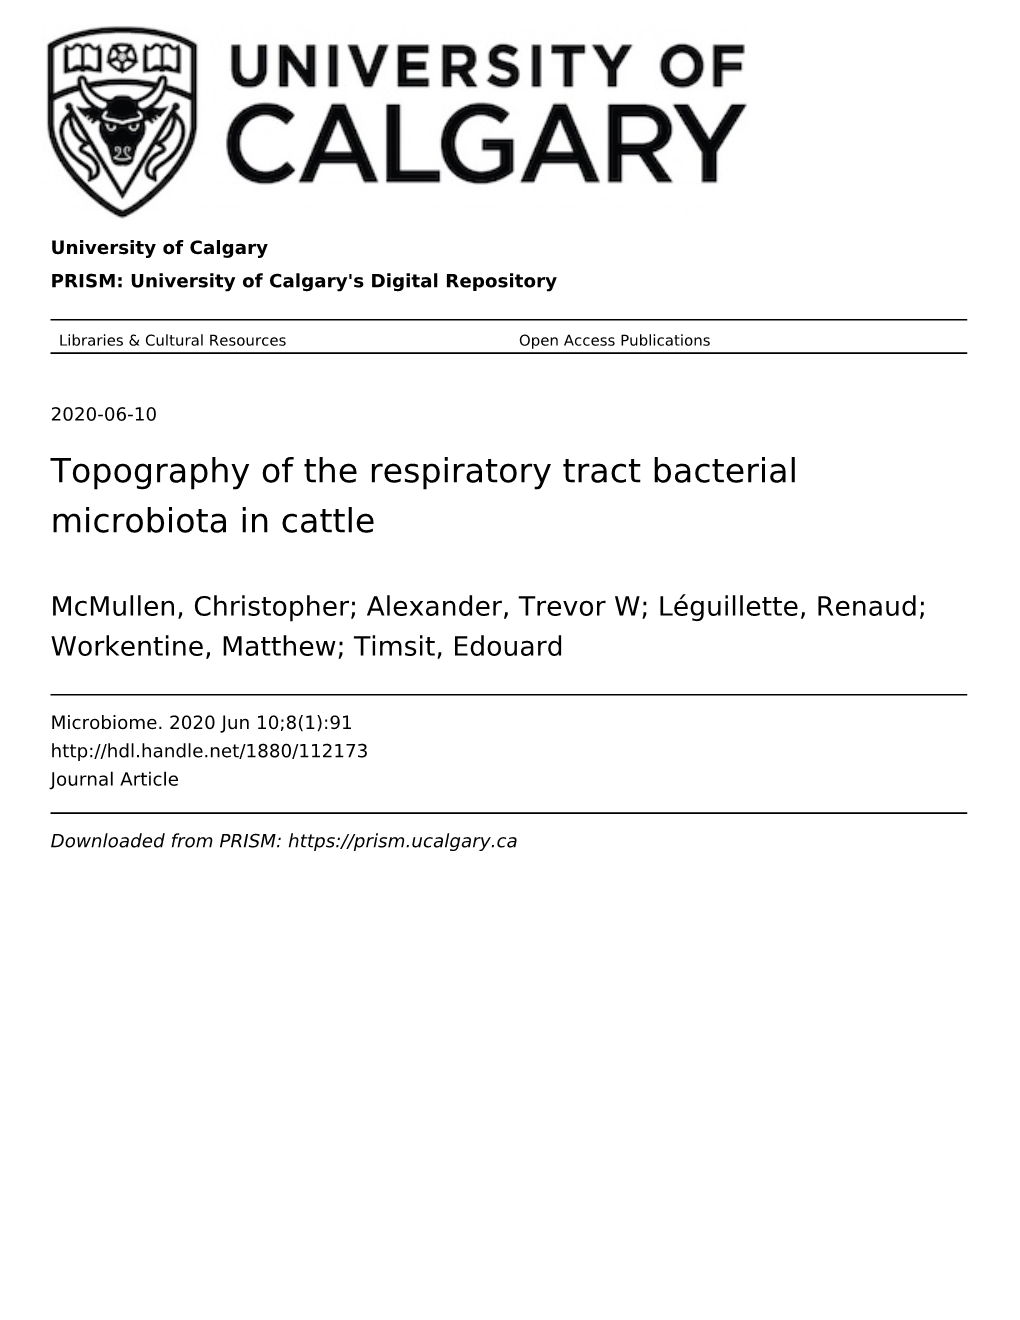 Topography of the Respiratory Tract Bacterial Microbiota in Cattle